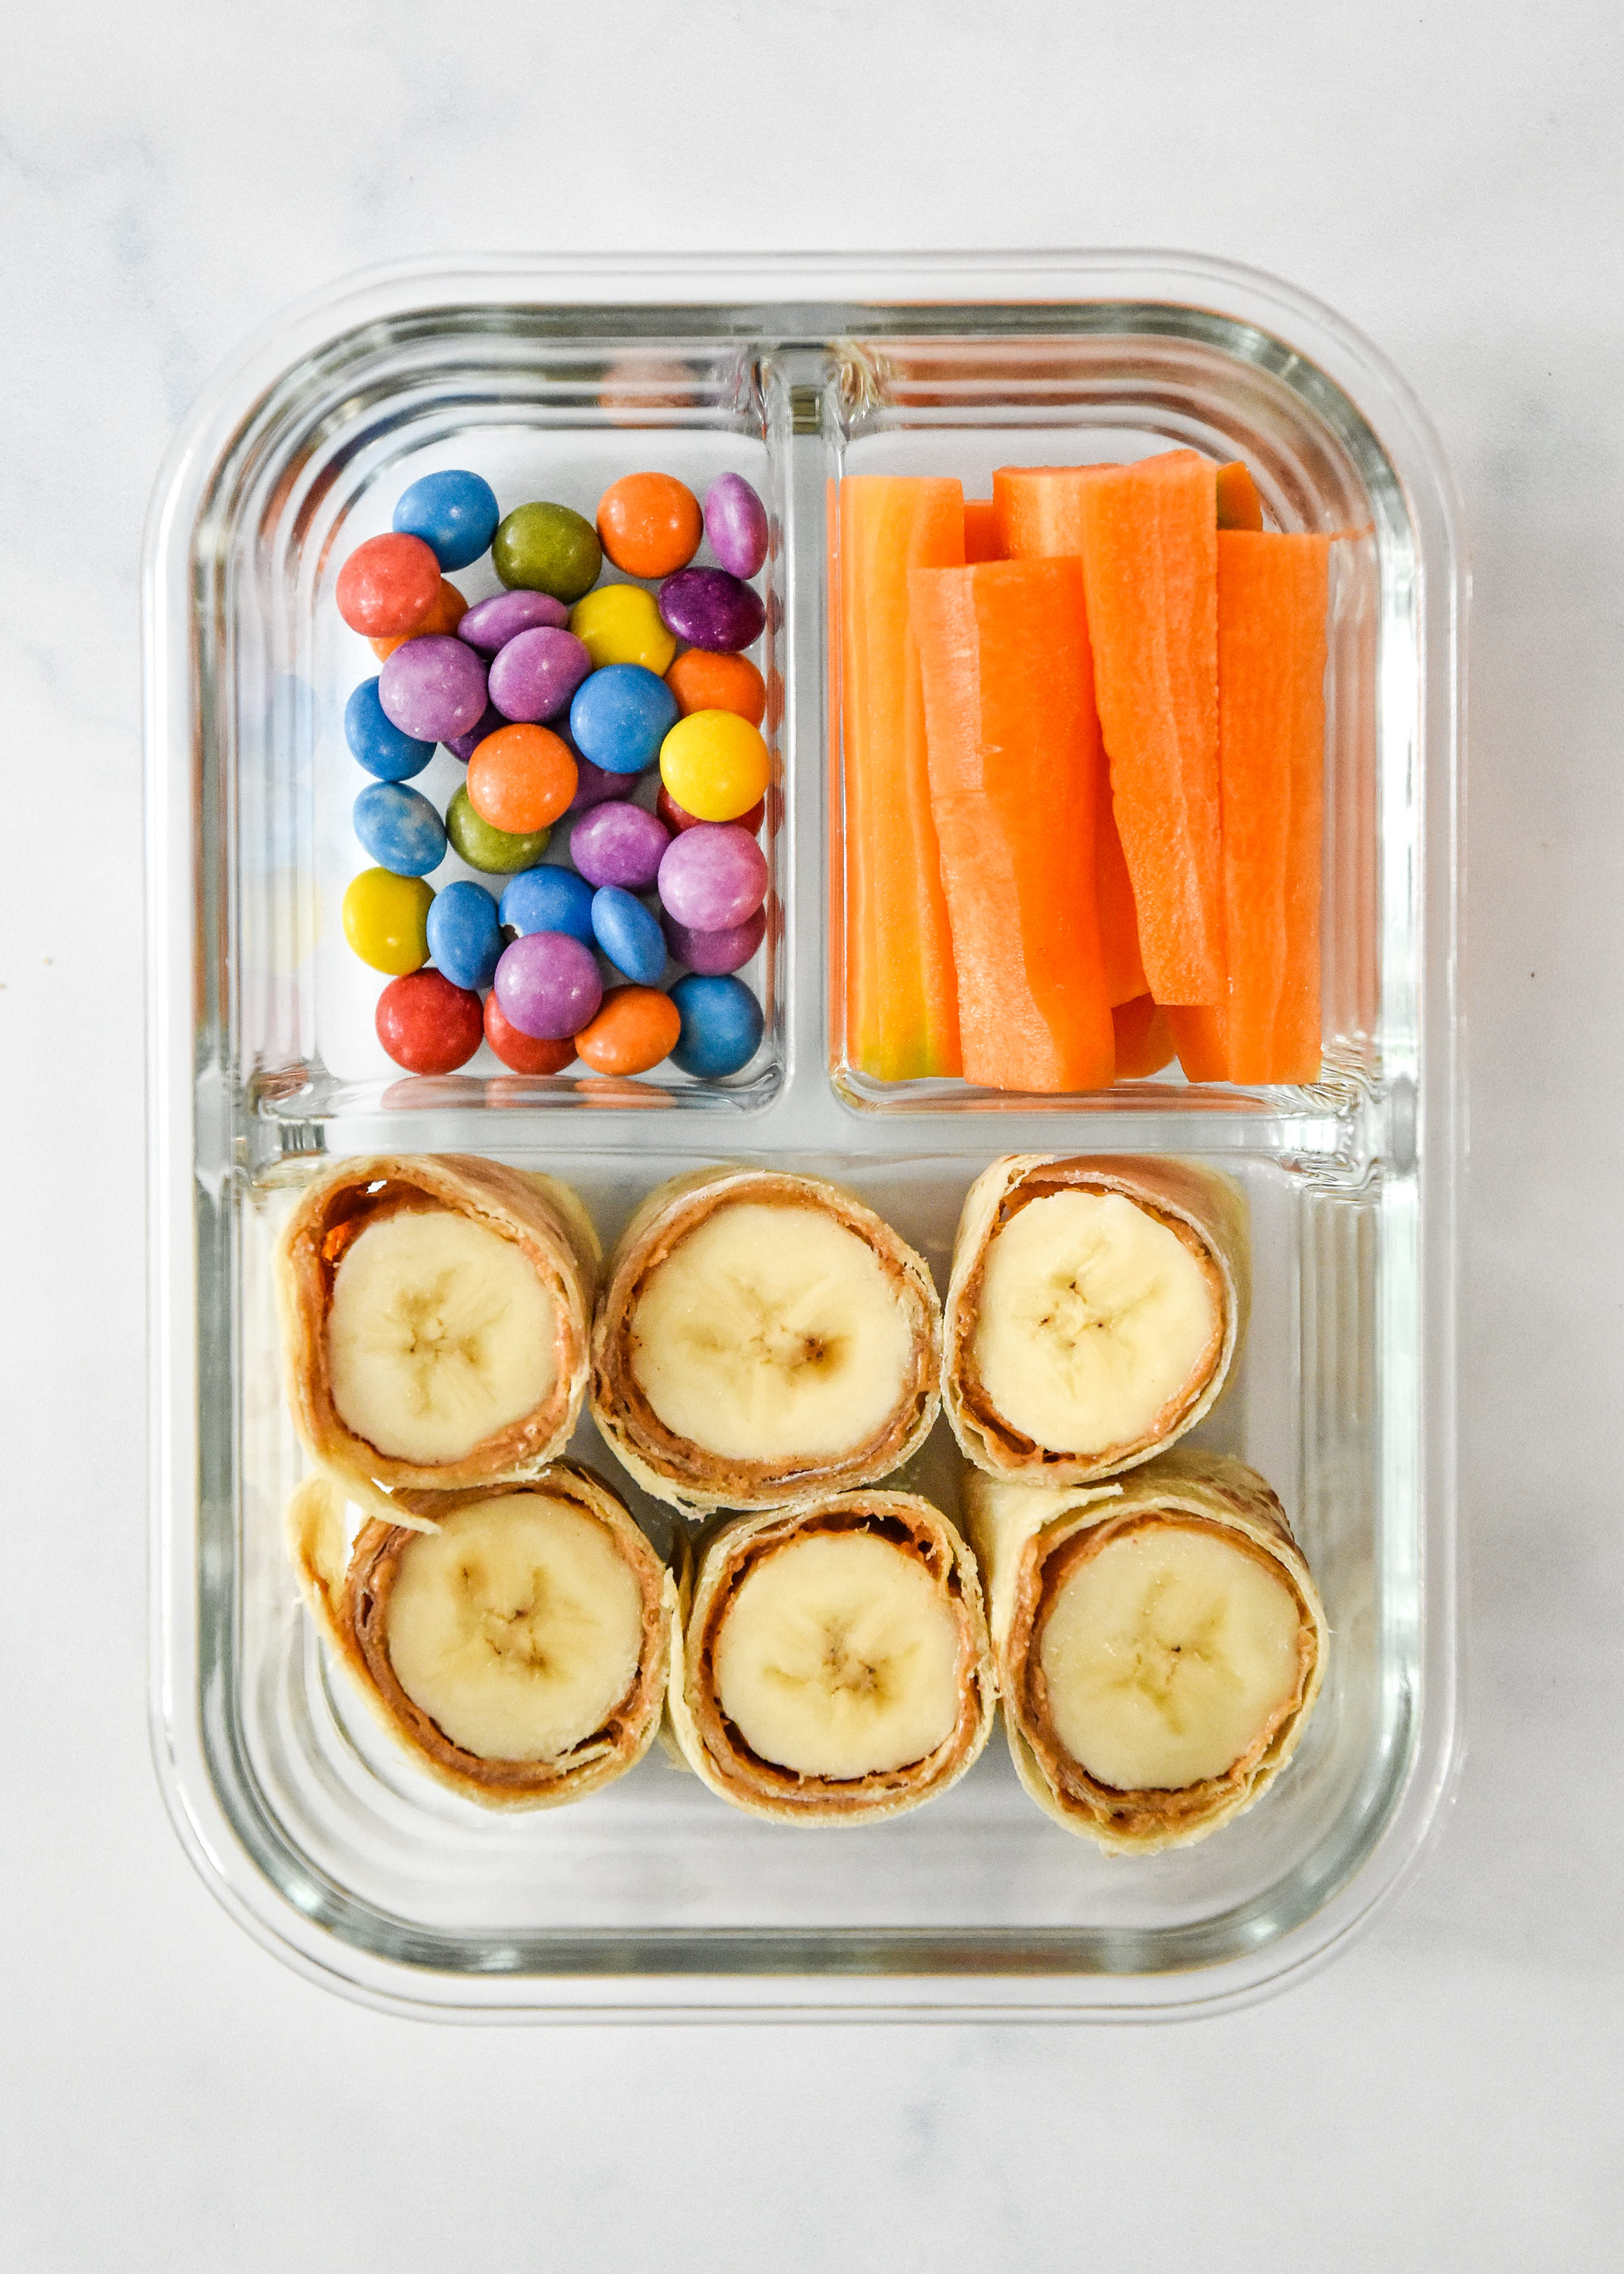 pb banana roll ups with carrot sticks and chocolate candies in a glass meal prep container.